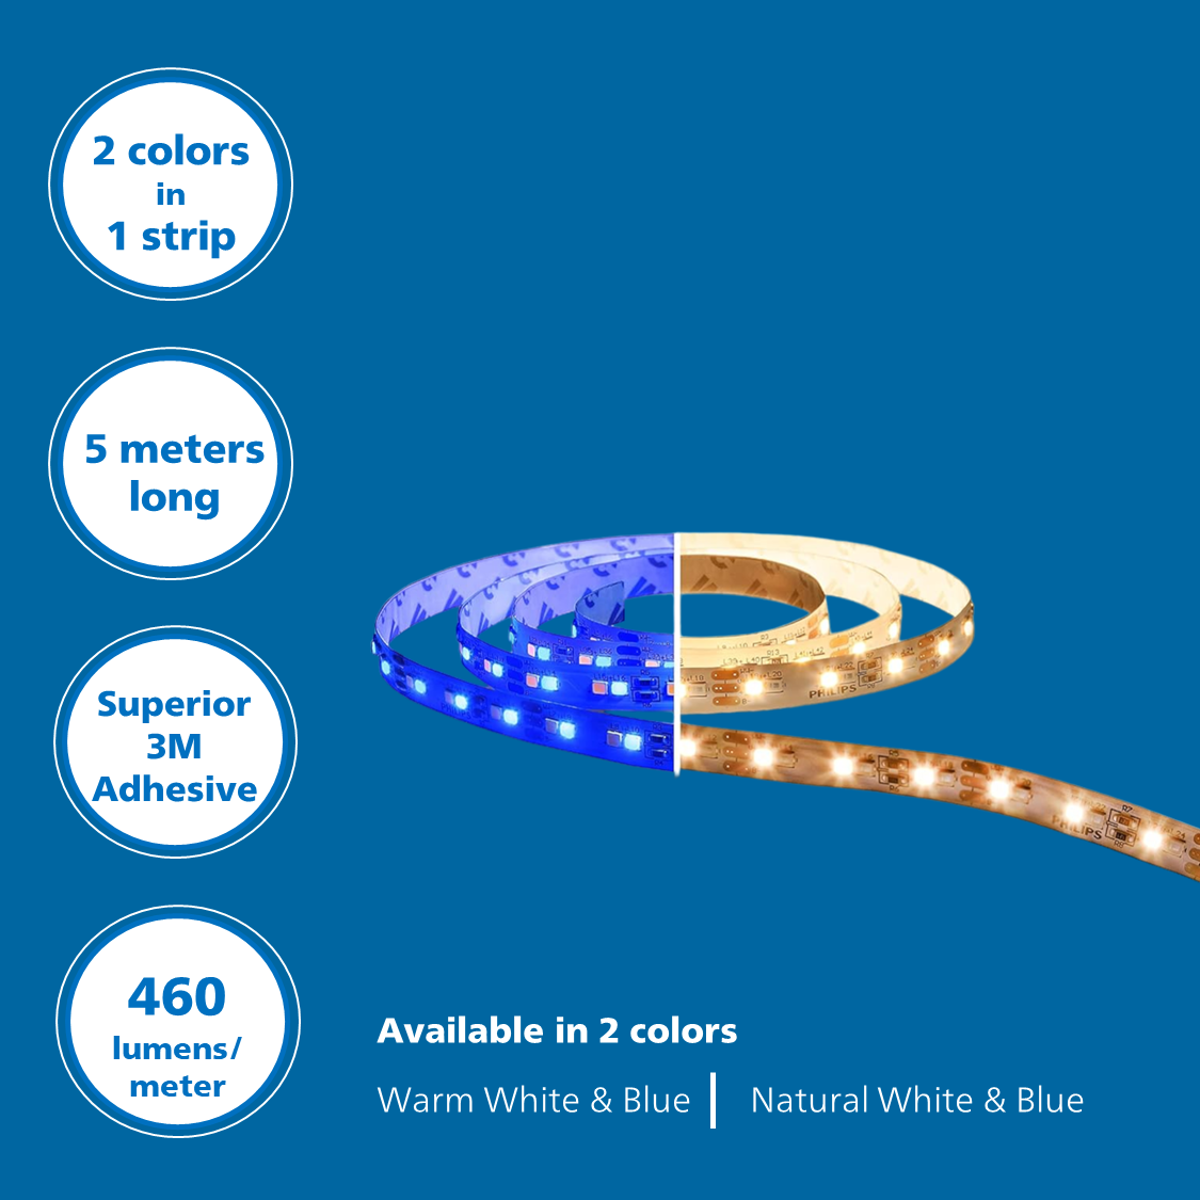 Philips Color Magic LED Strip light (2 colors in 1 light strip)